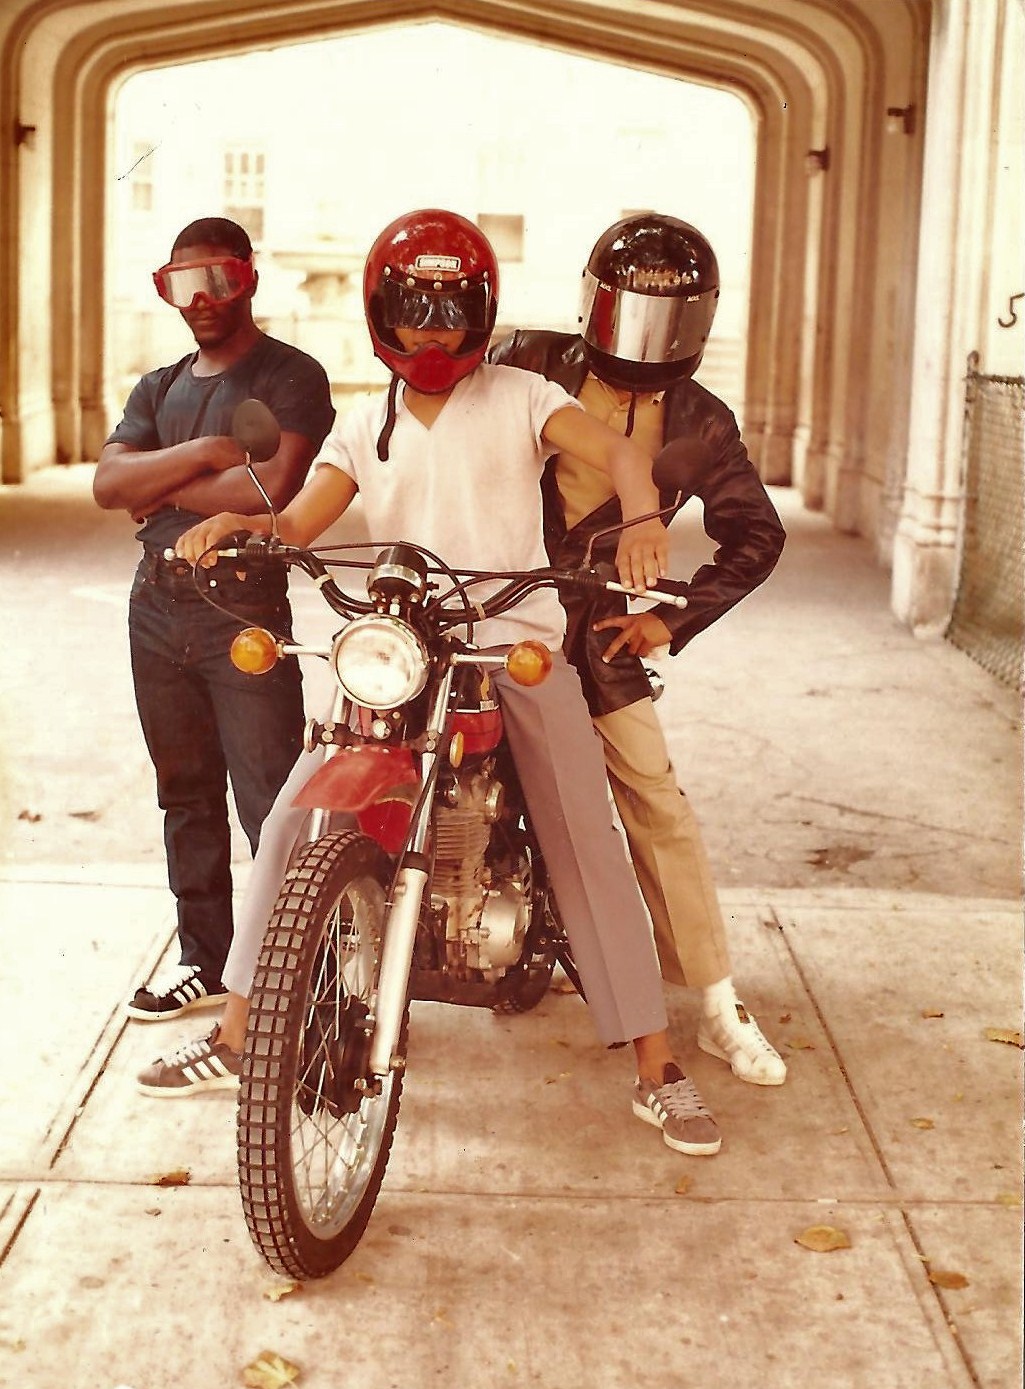 Street Photography Exhibition Qatar Brooklyn Jamel Shabazz 1980 Unknown Riders Vintage, Exhibition at The Gallery at VCUarts Qatar